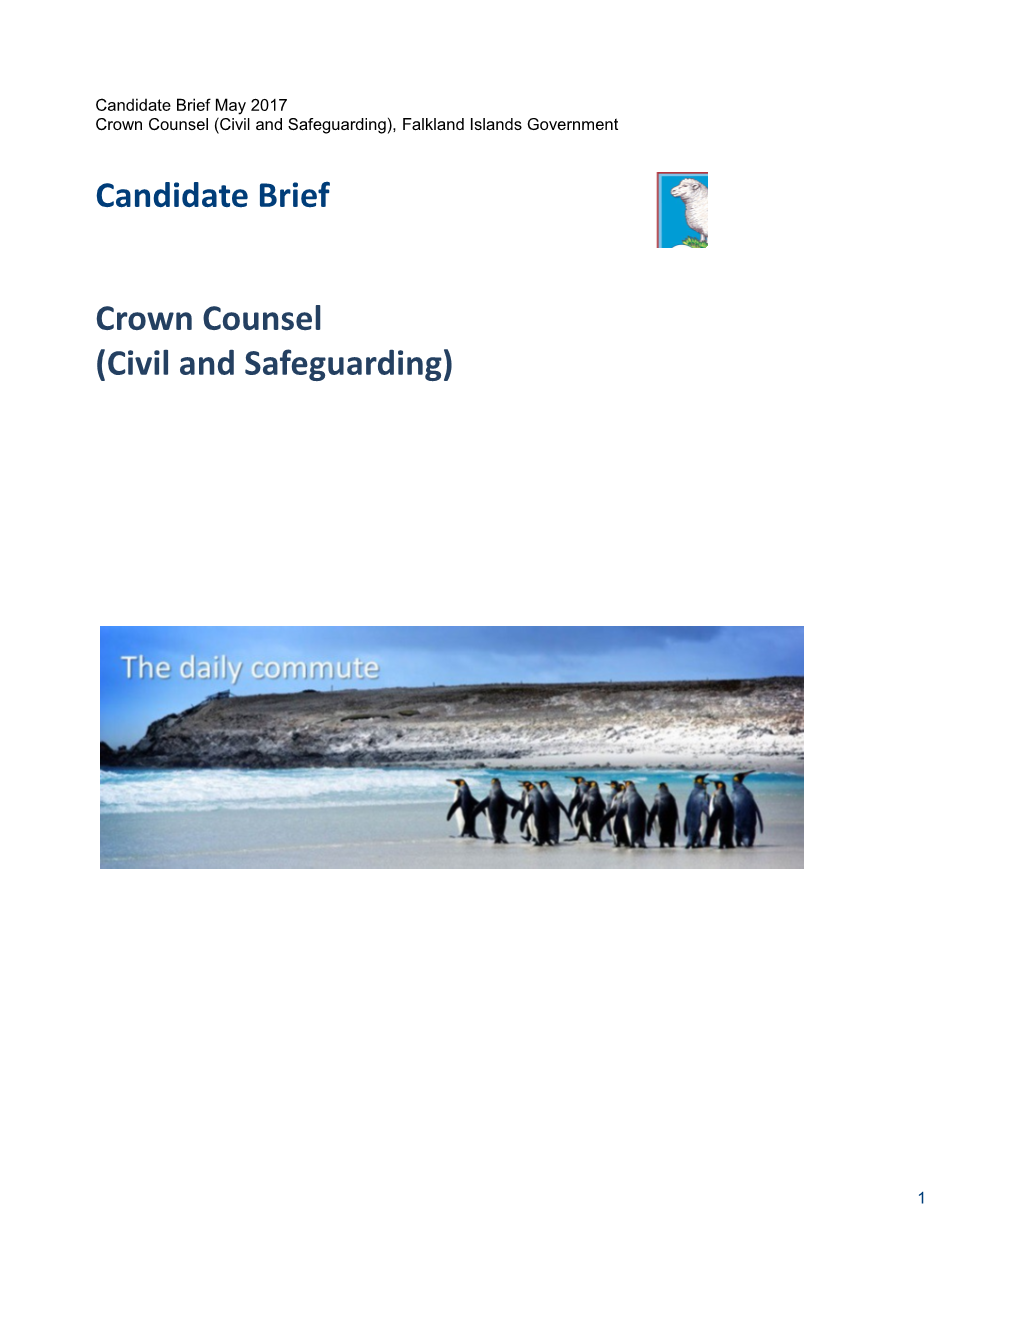 Crown Counsel (Civil and Safeguarding), Falkland Islands Government